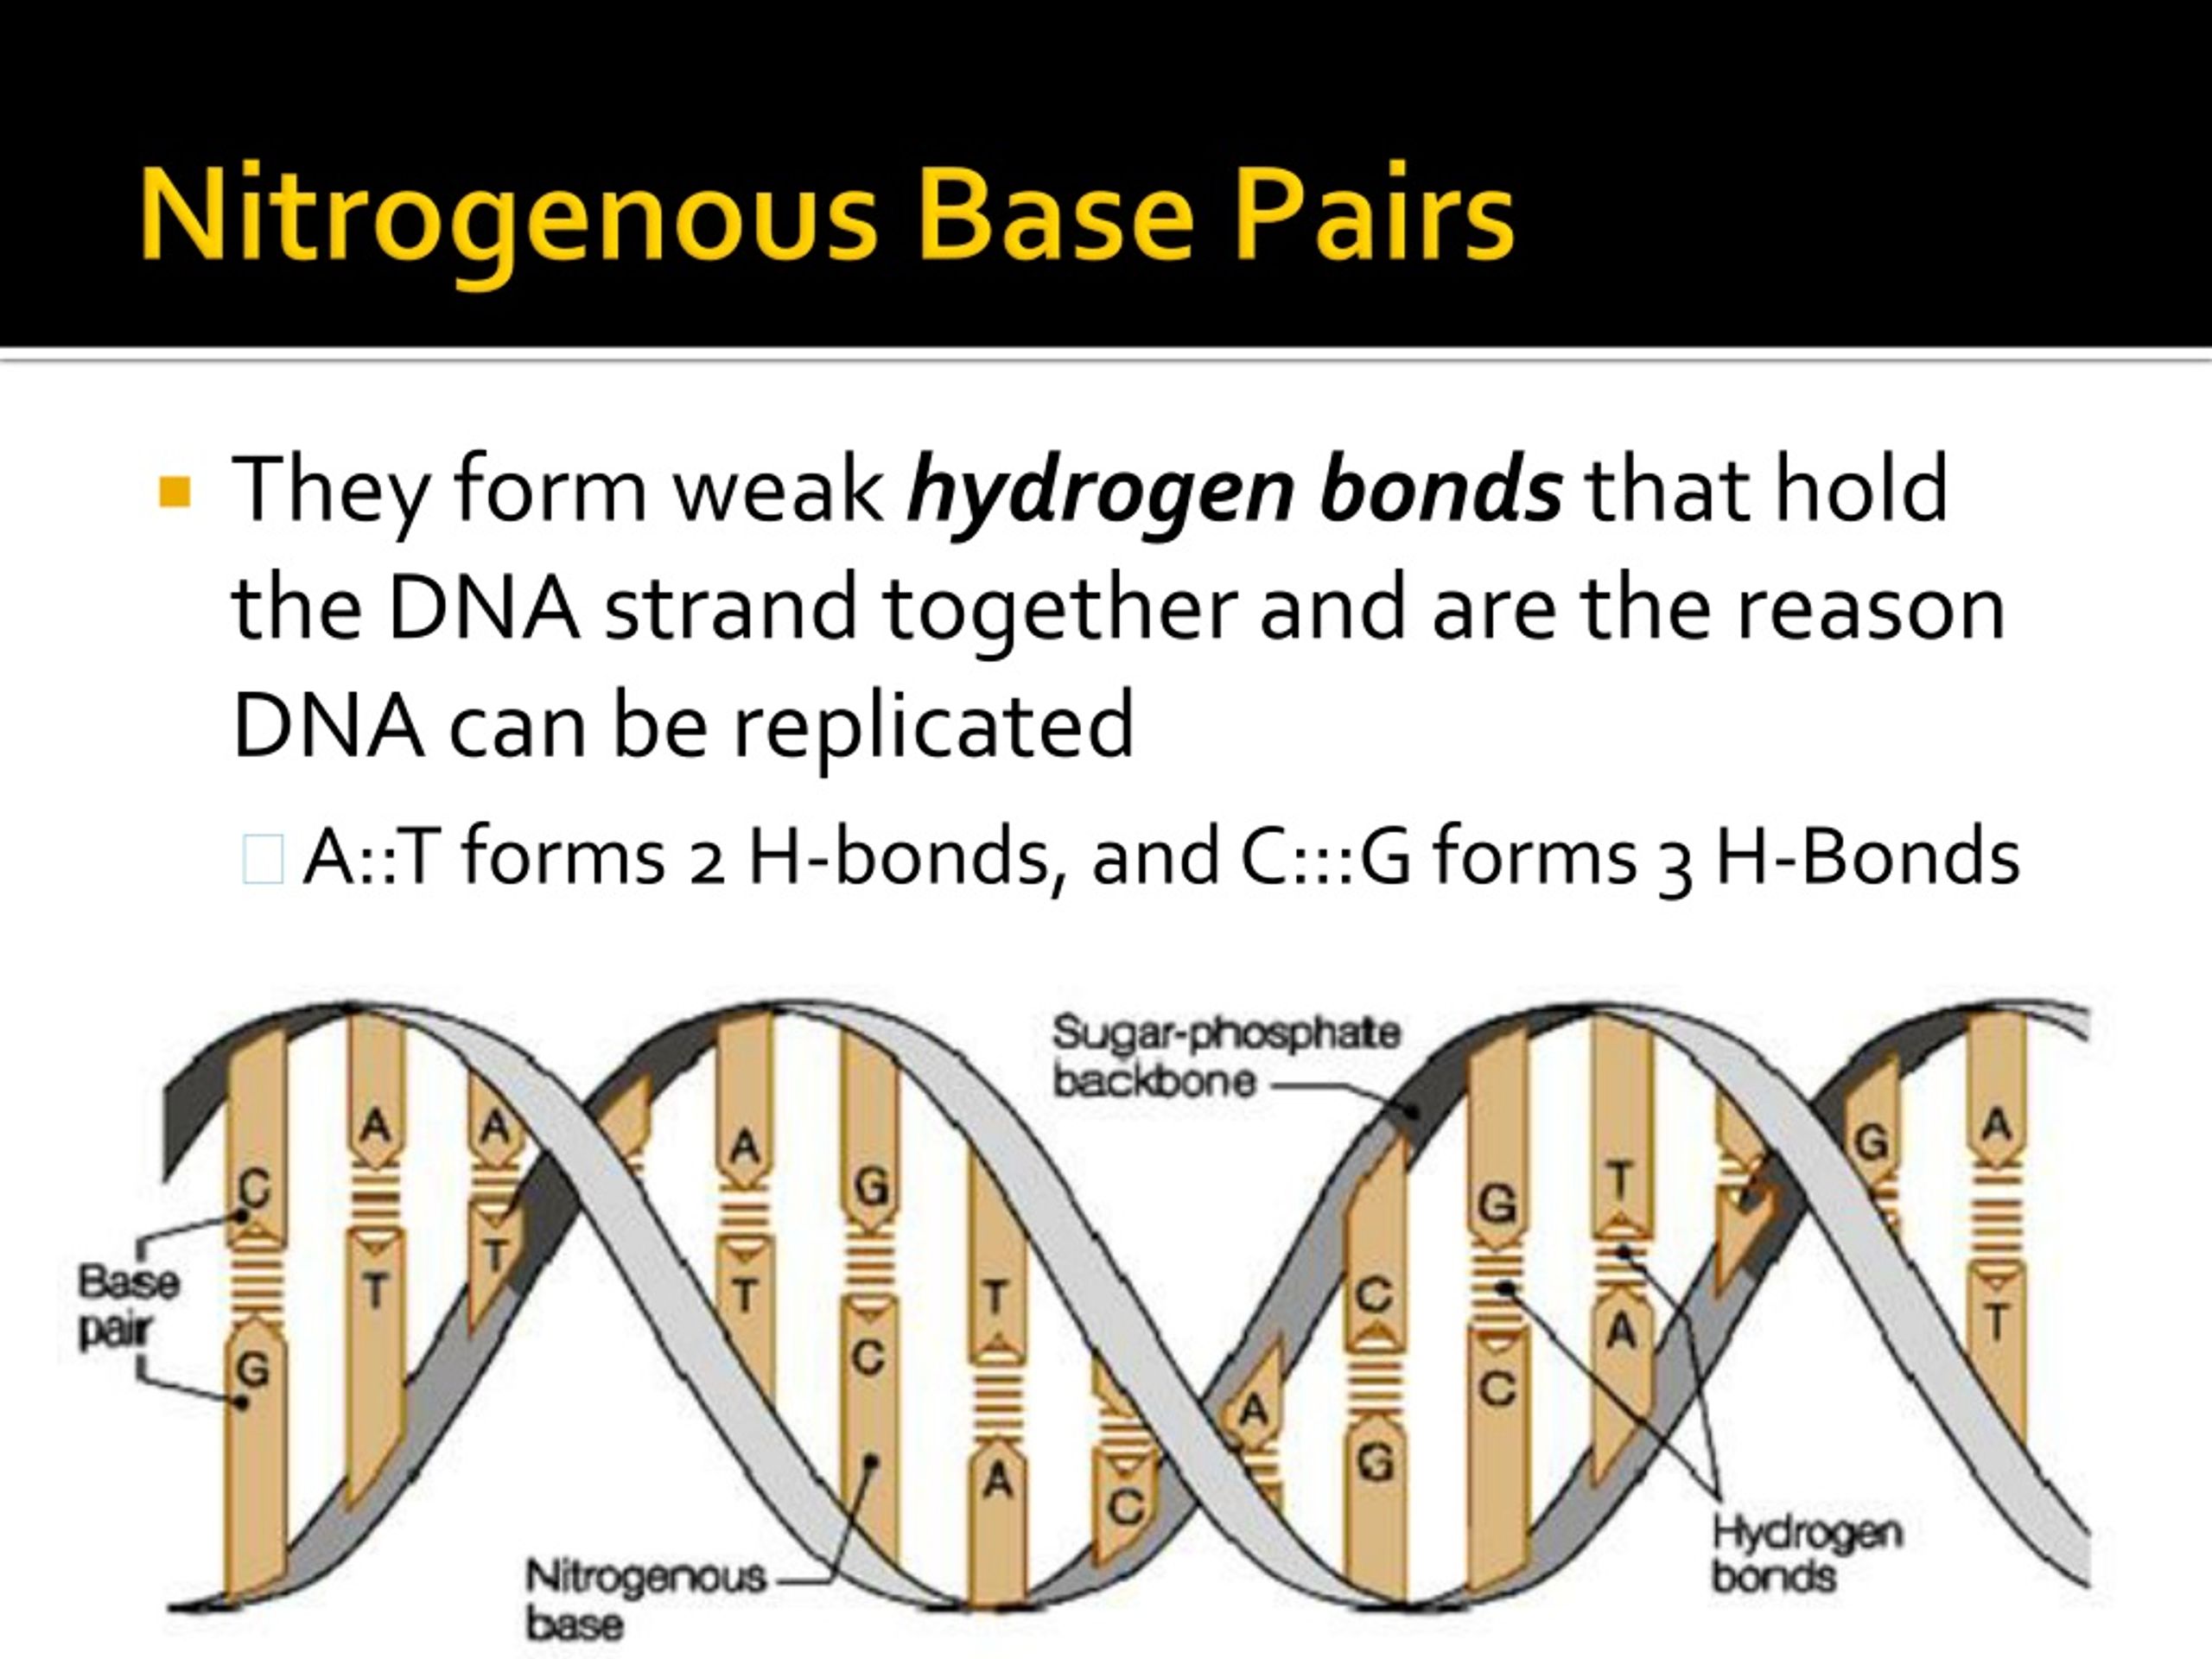 What is the job of dna nitrogen bases during replication